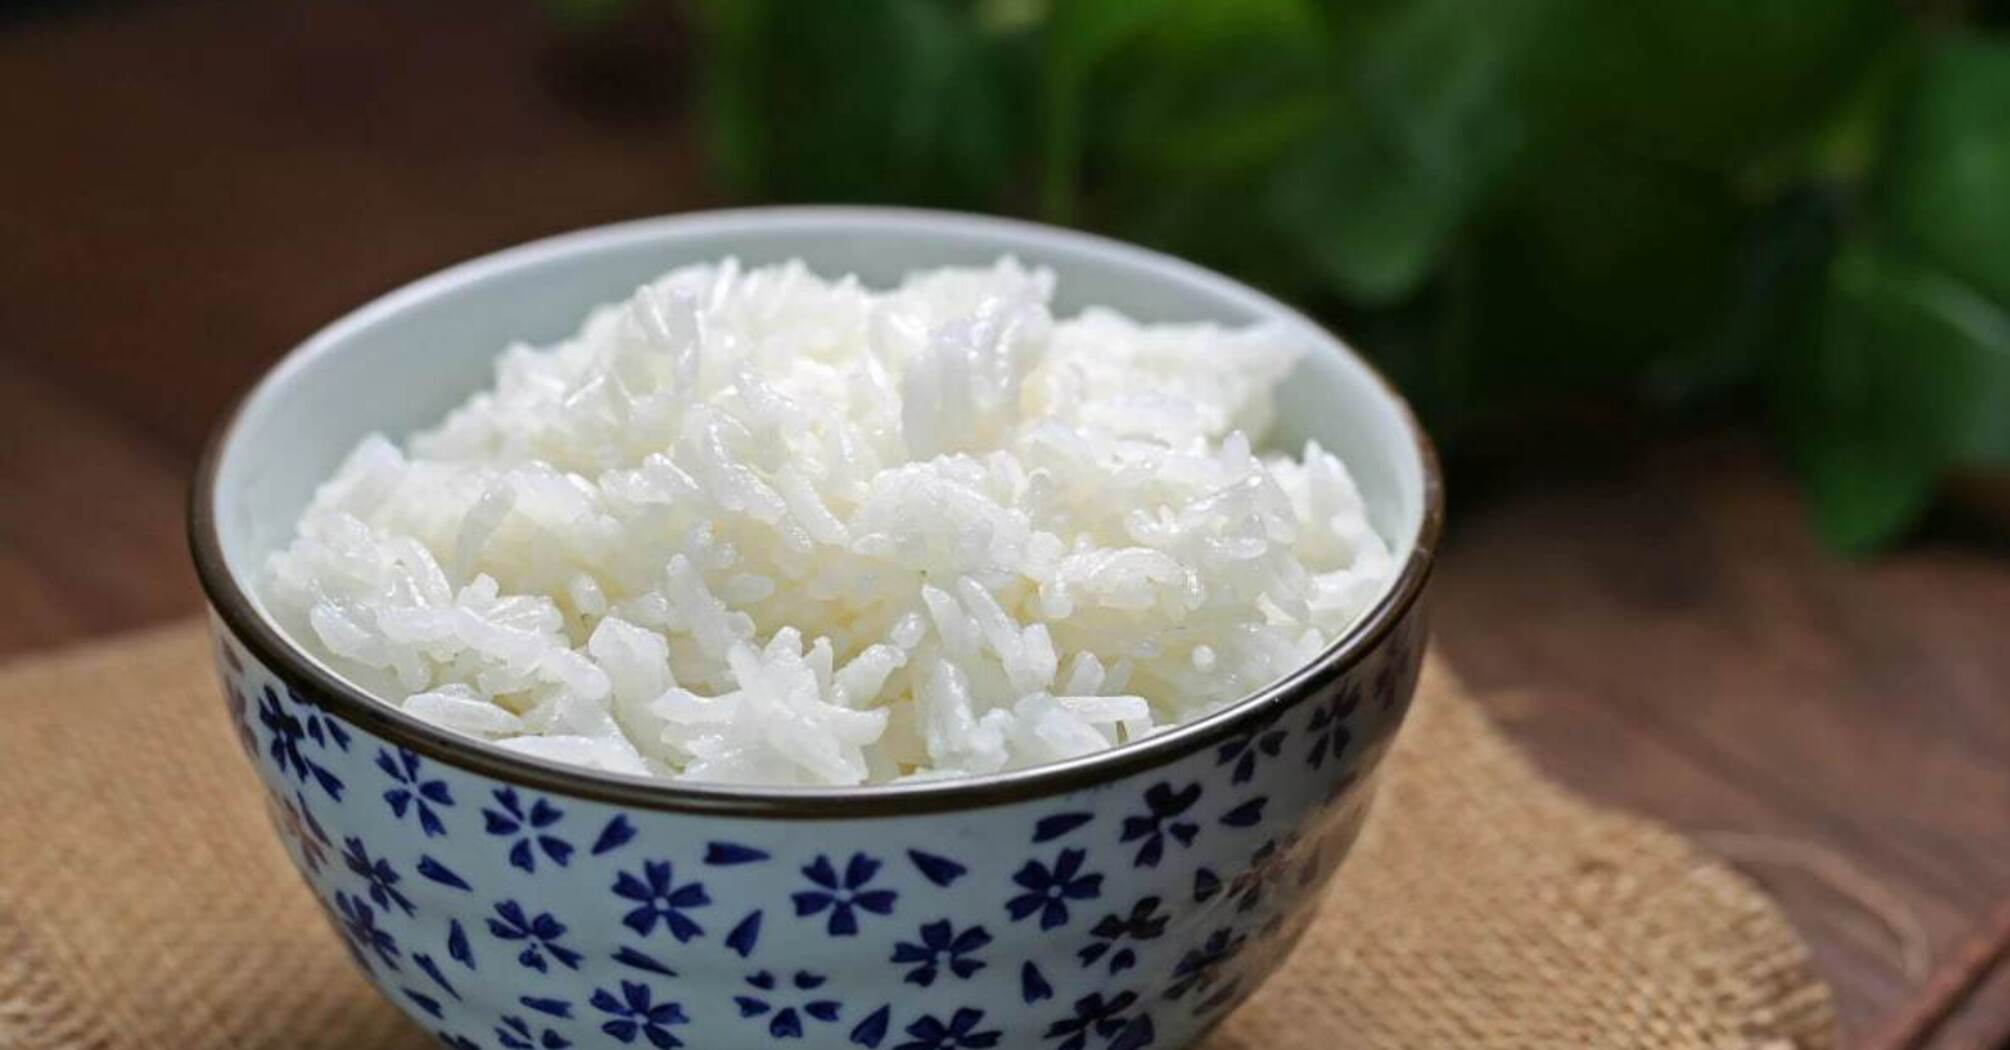 How to cook rice correctly to make it crumbly